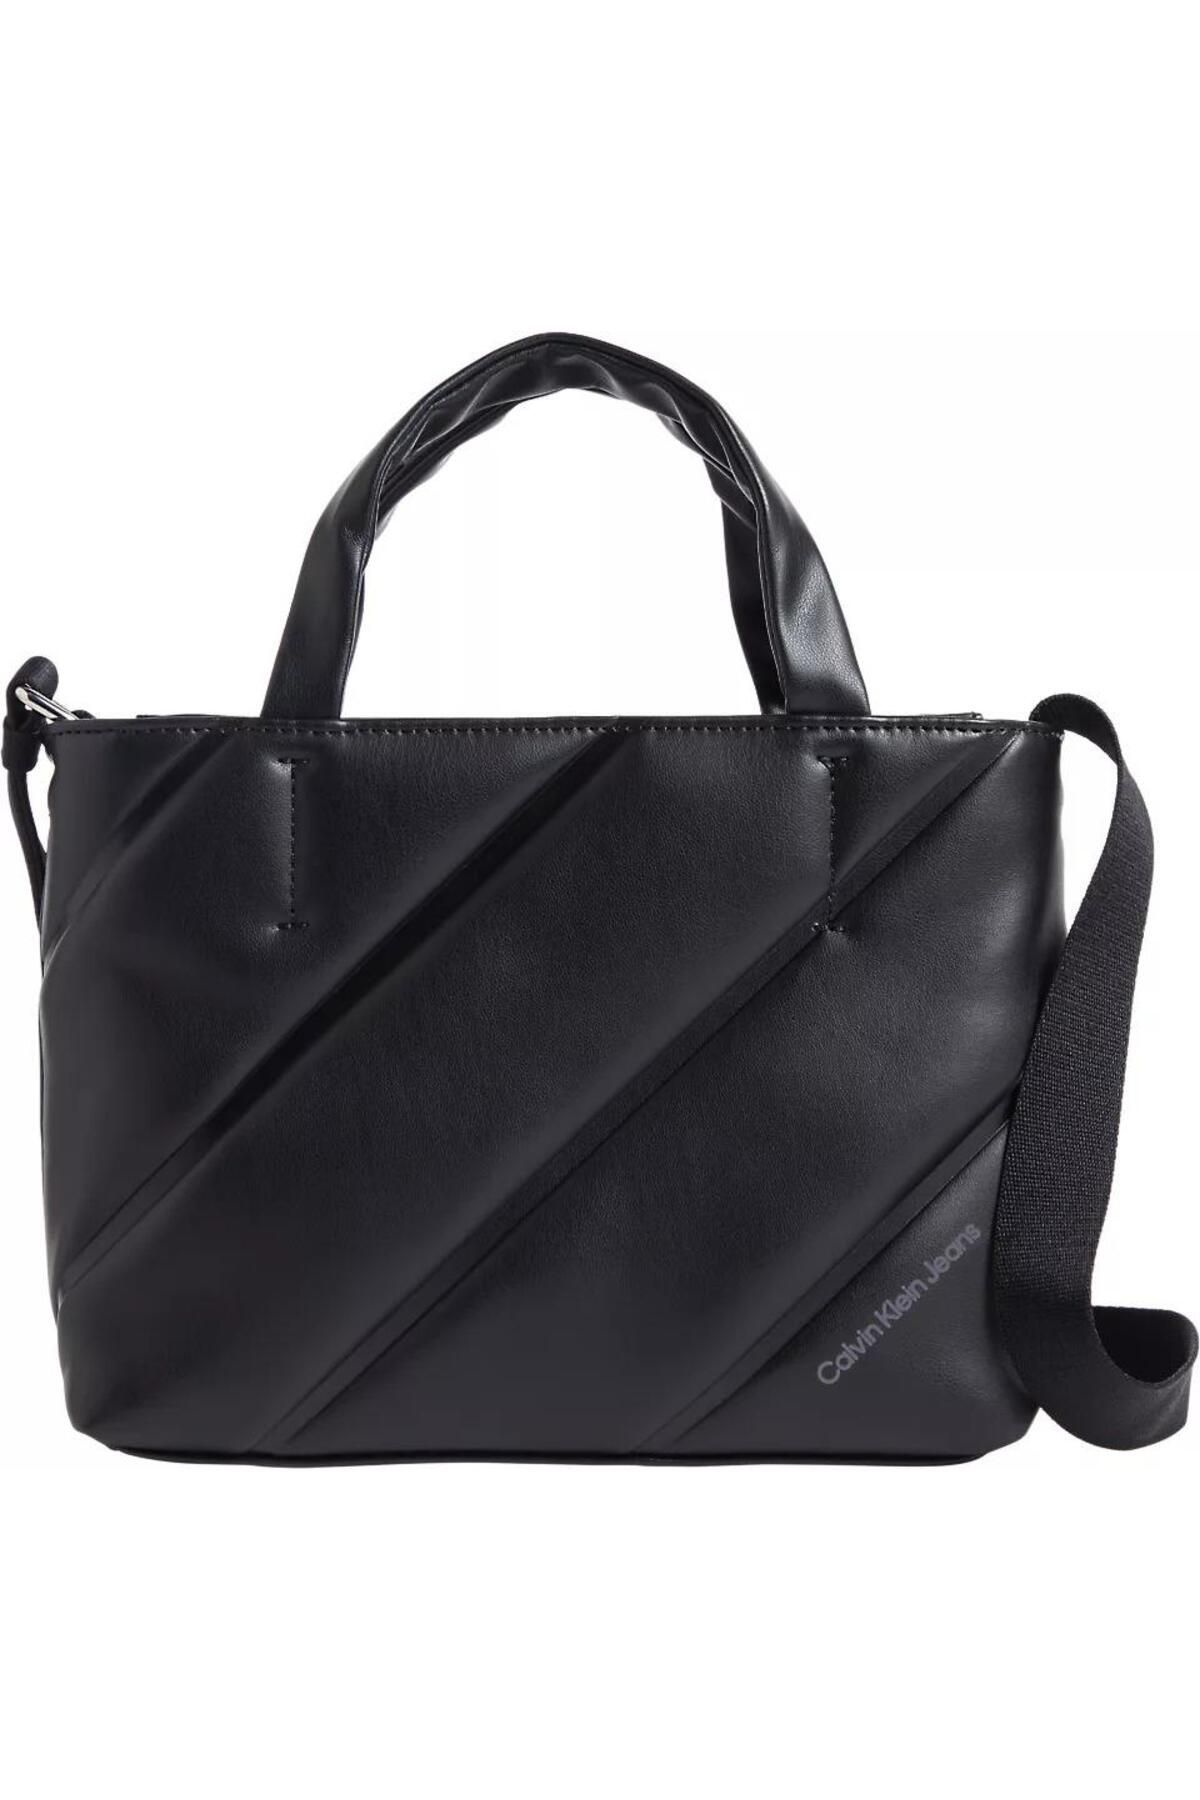 Calvin Klein QUILTED MICRO EW TOTE22